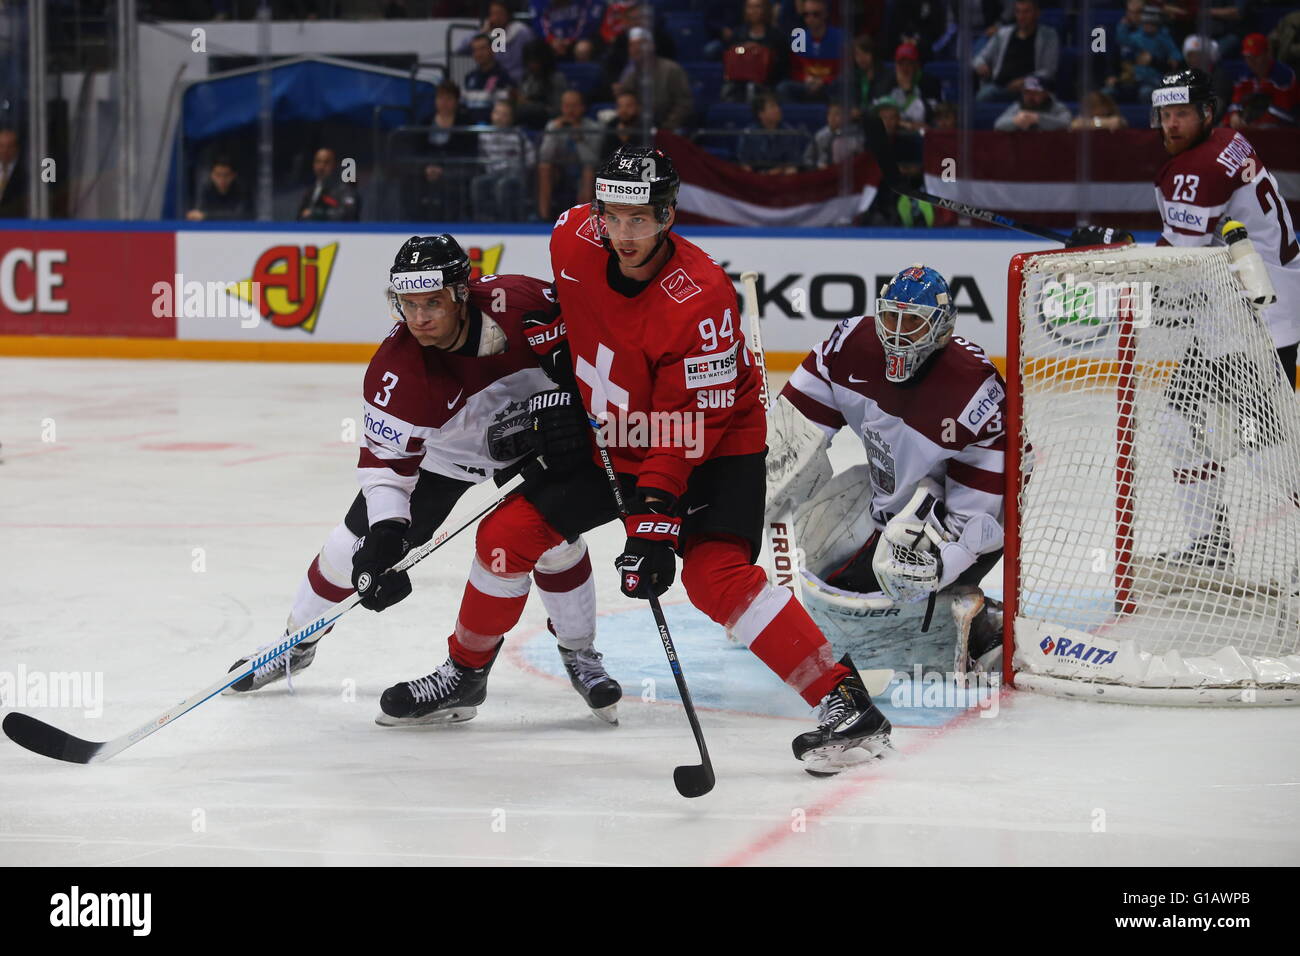 Moscow, Russia. 11th May, 2016. Samuel Walser of Switzerland (C) vies with Maksims Sirokovs (L) and Edgars Masalskis (R) of Latvia during an IIHF Ice Hockey World Championship Group A preliminary round game between Switzerland and Latvia in Moscow, Russia, on May 11, 2016. Switzerland won 5-4. © Evgeny Sinitsyn/Xinhua/Alamy Live News Stock Photo